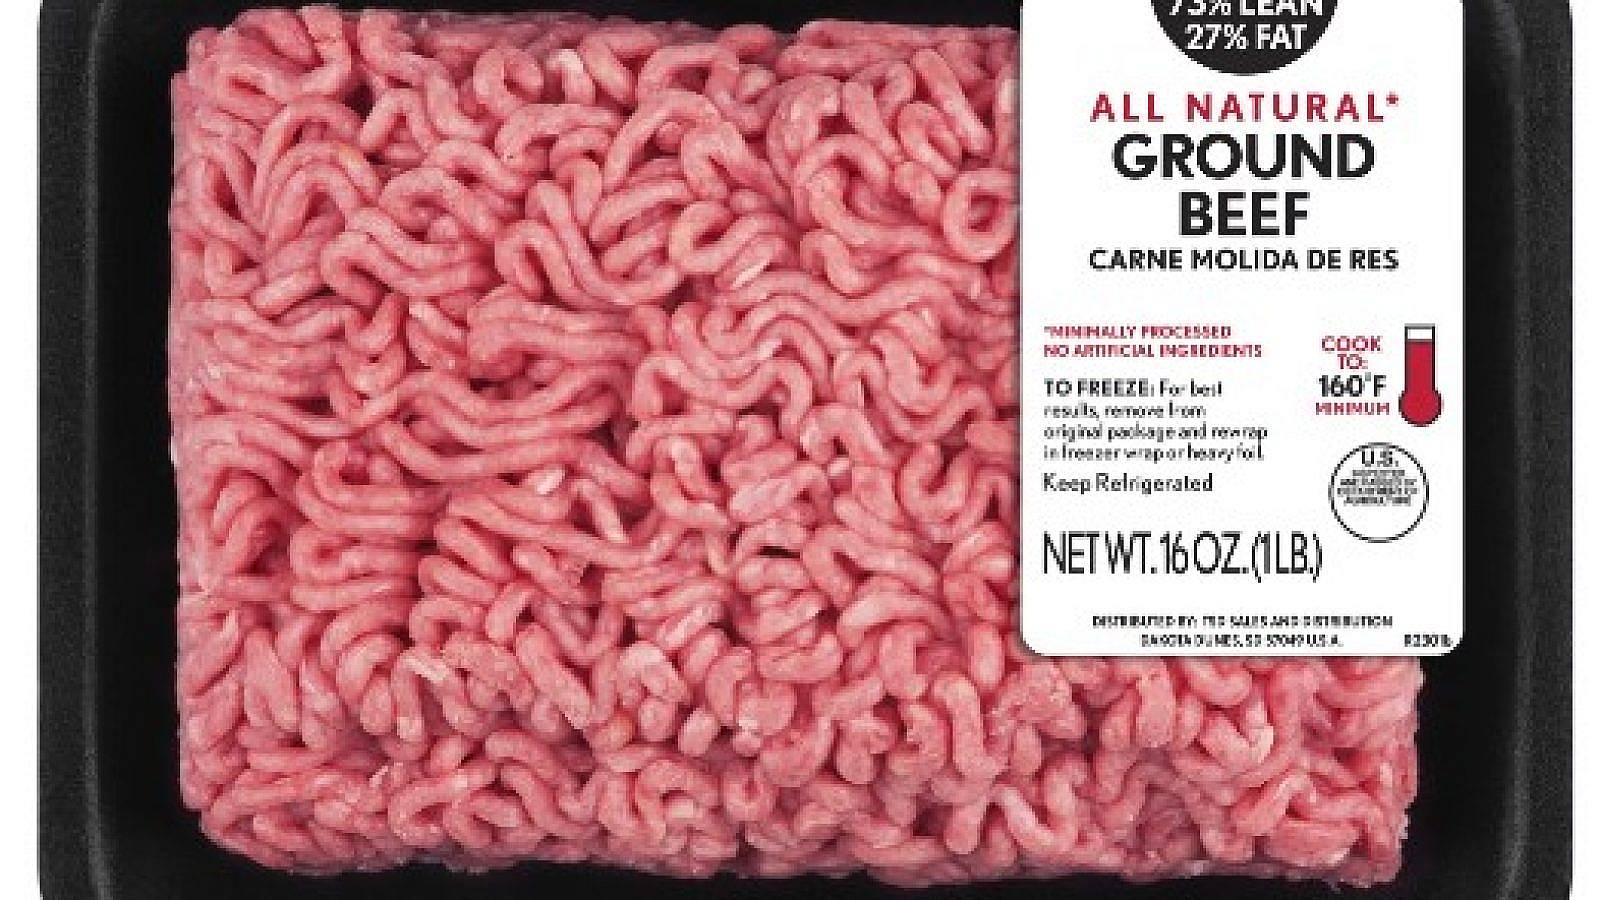 A retail package of ground beef hamburger